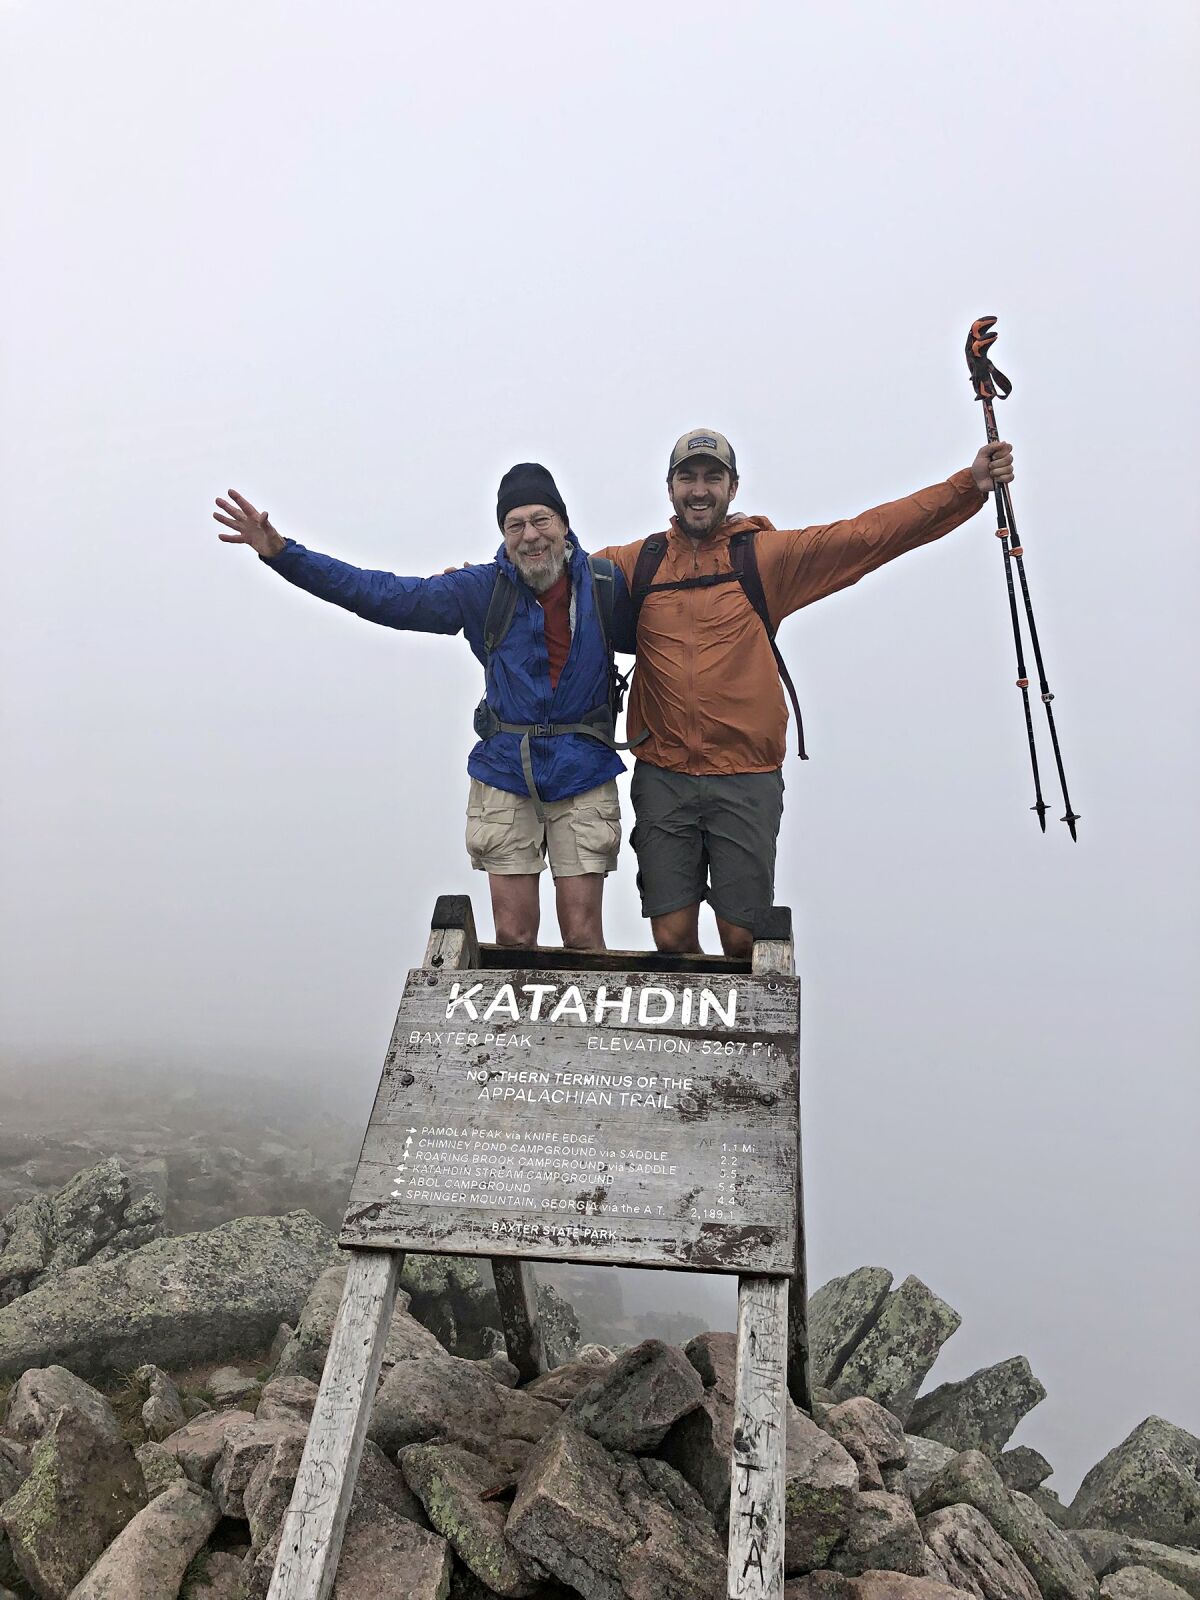 Two men with their arms raised by a sign that says Katahdin